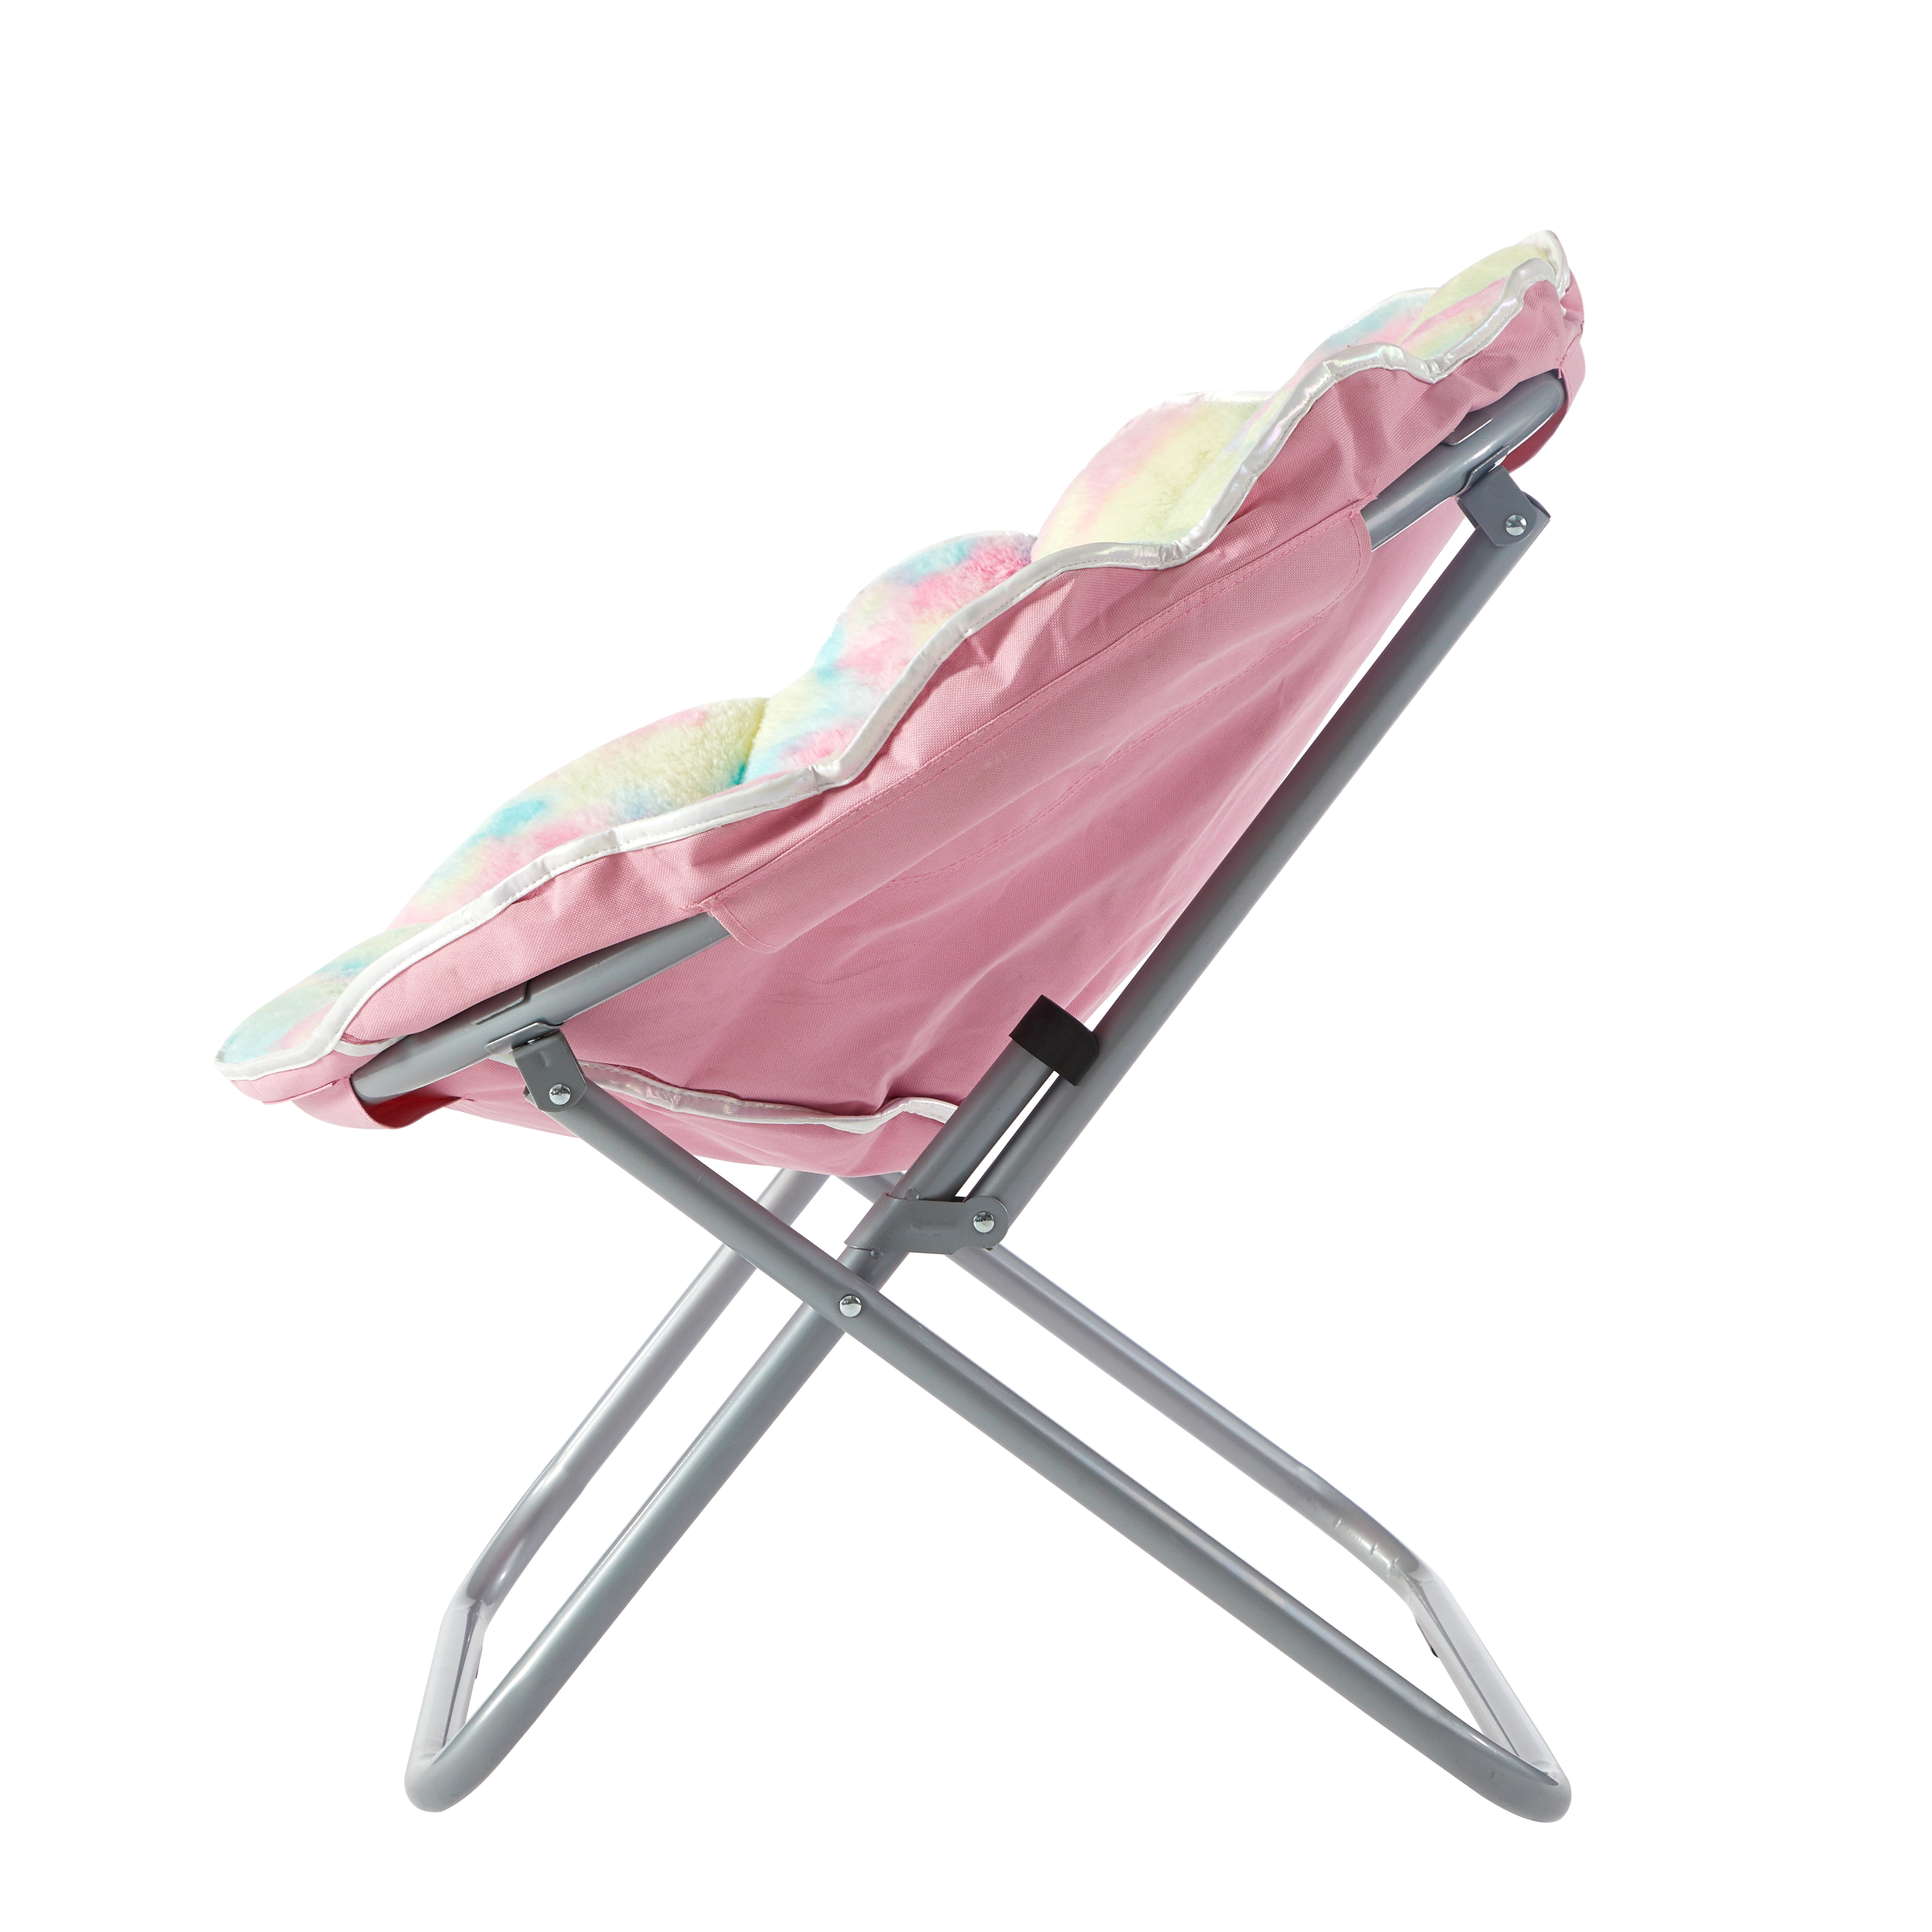 Justice Faux Fur Scallop Saucer™ Chair with Holographic Trim, Rainbow Tie Dye Pink - image 7 of 8